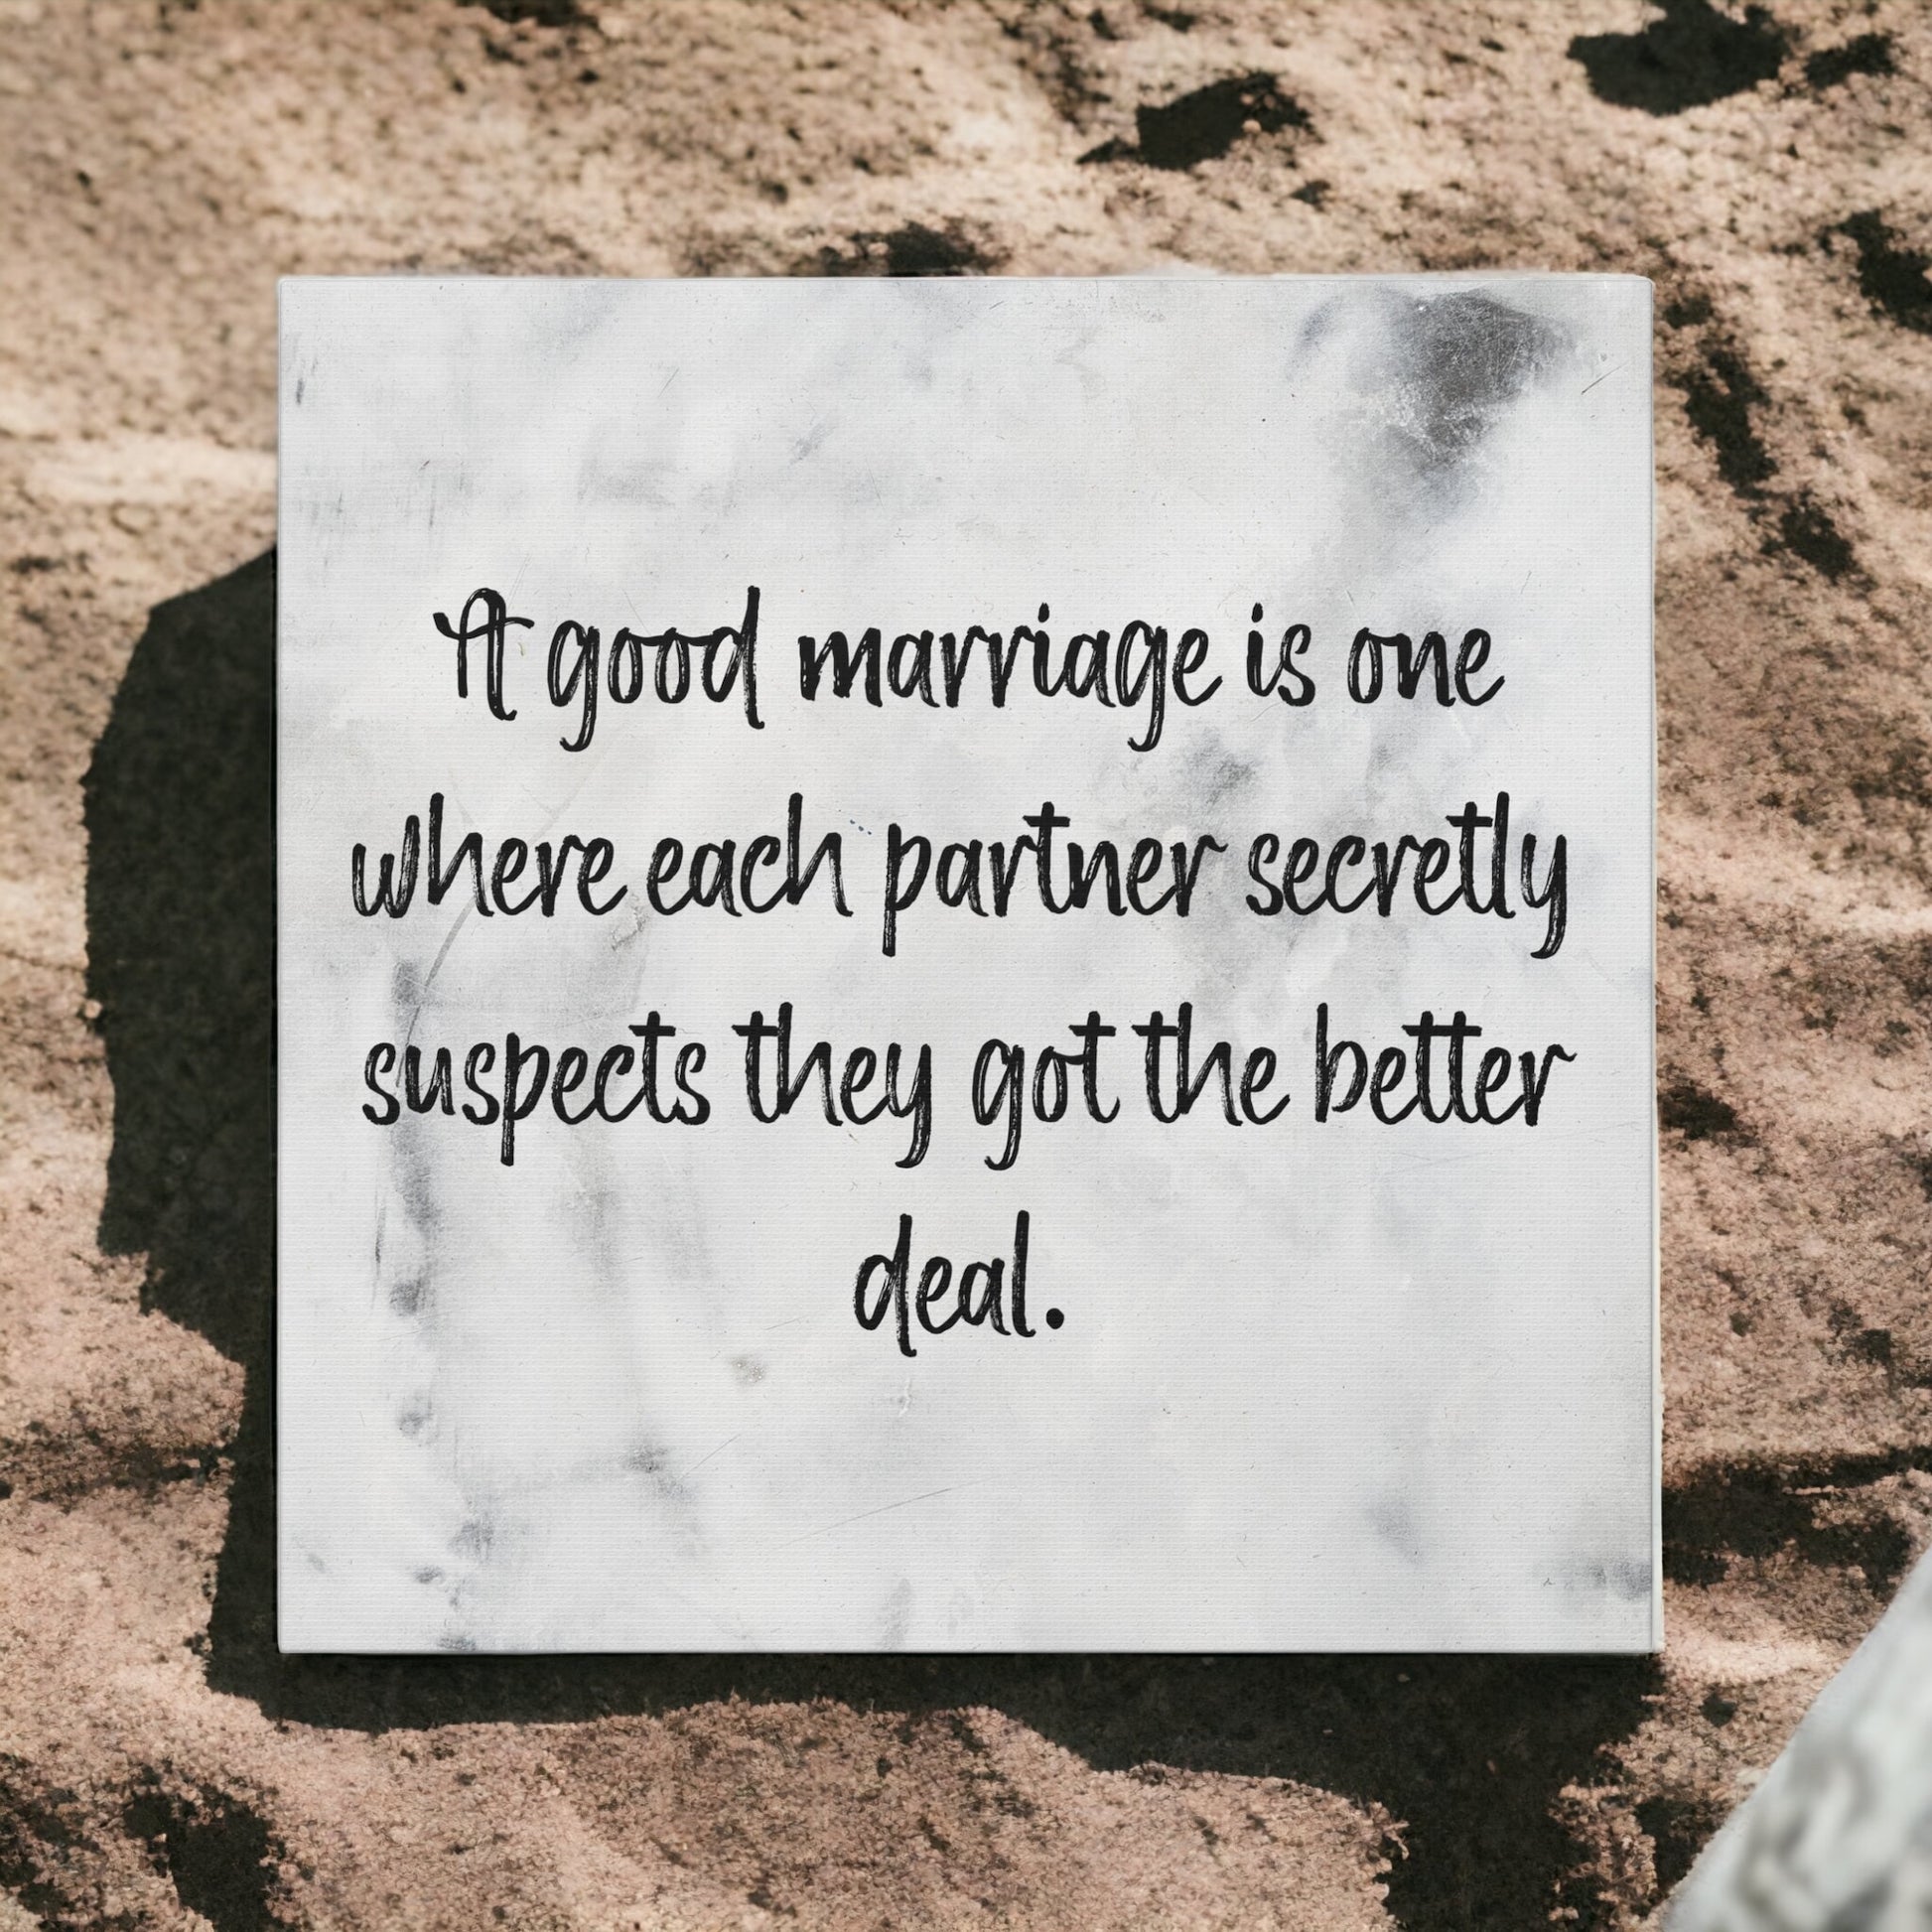 Humorous marriage quote canvas wall art for couples.